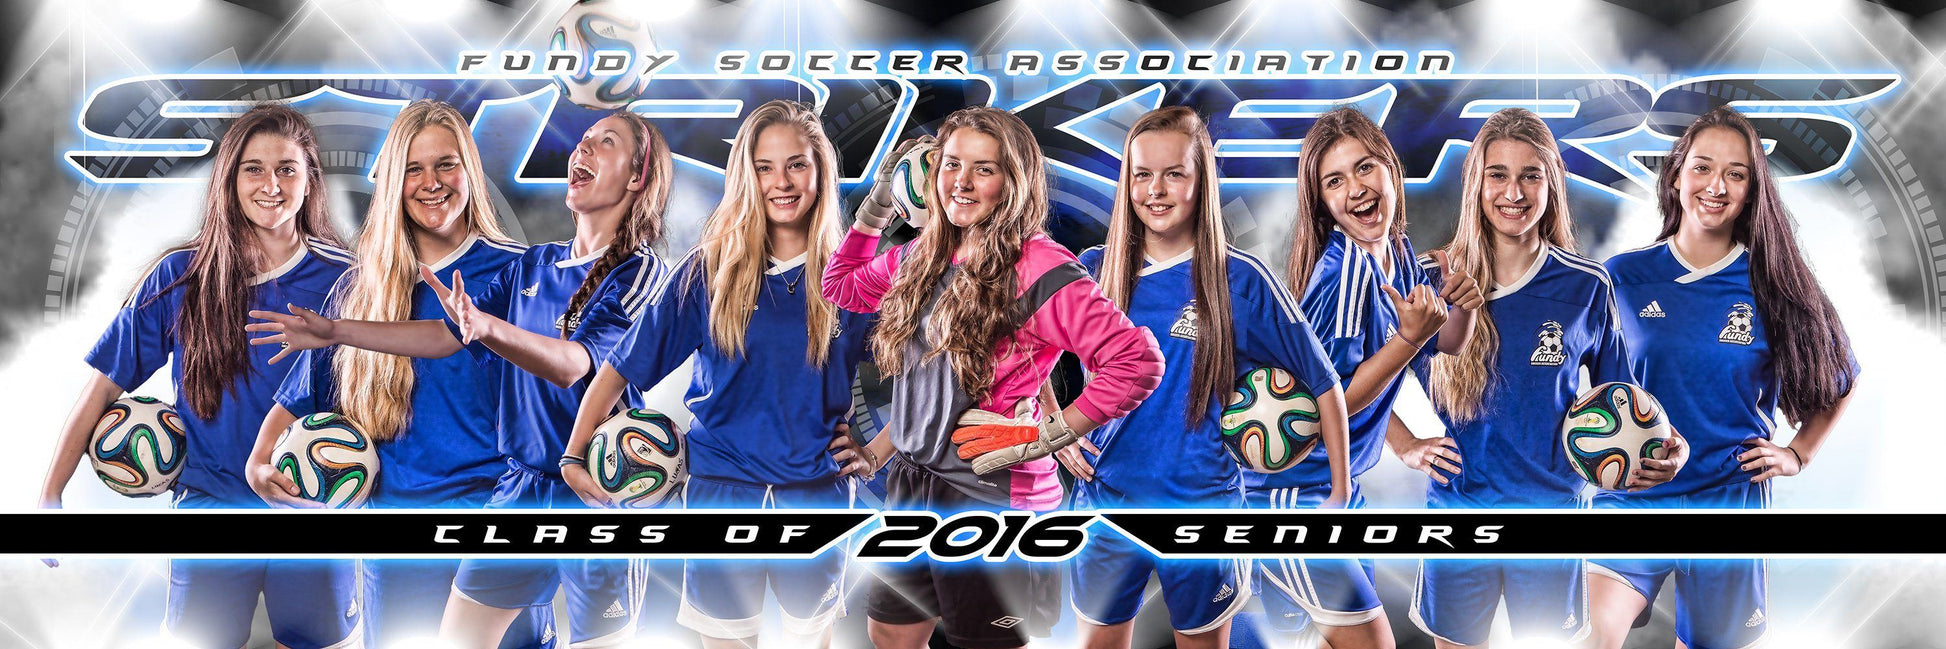 Light Storm v.5 - Team Panoramic-Photoshop Template - Photo Solutions